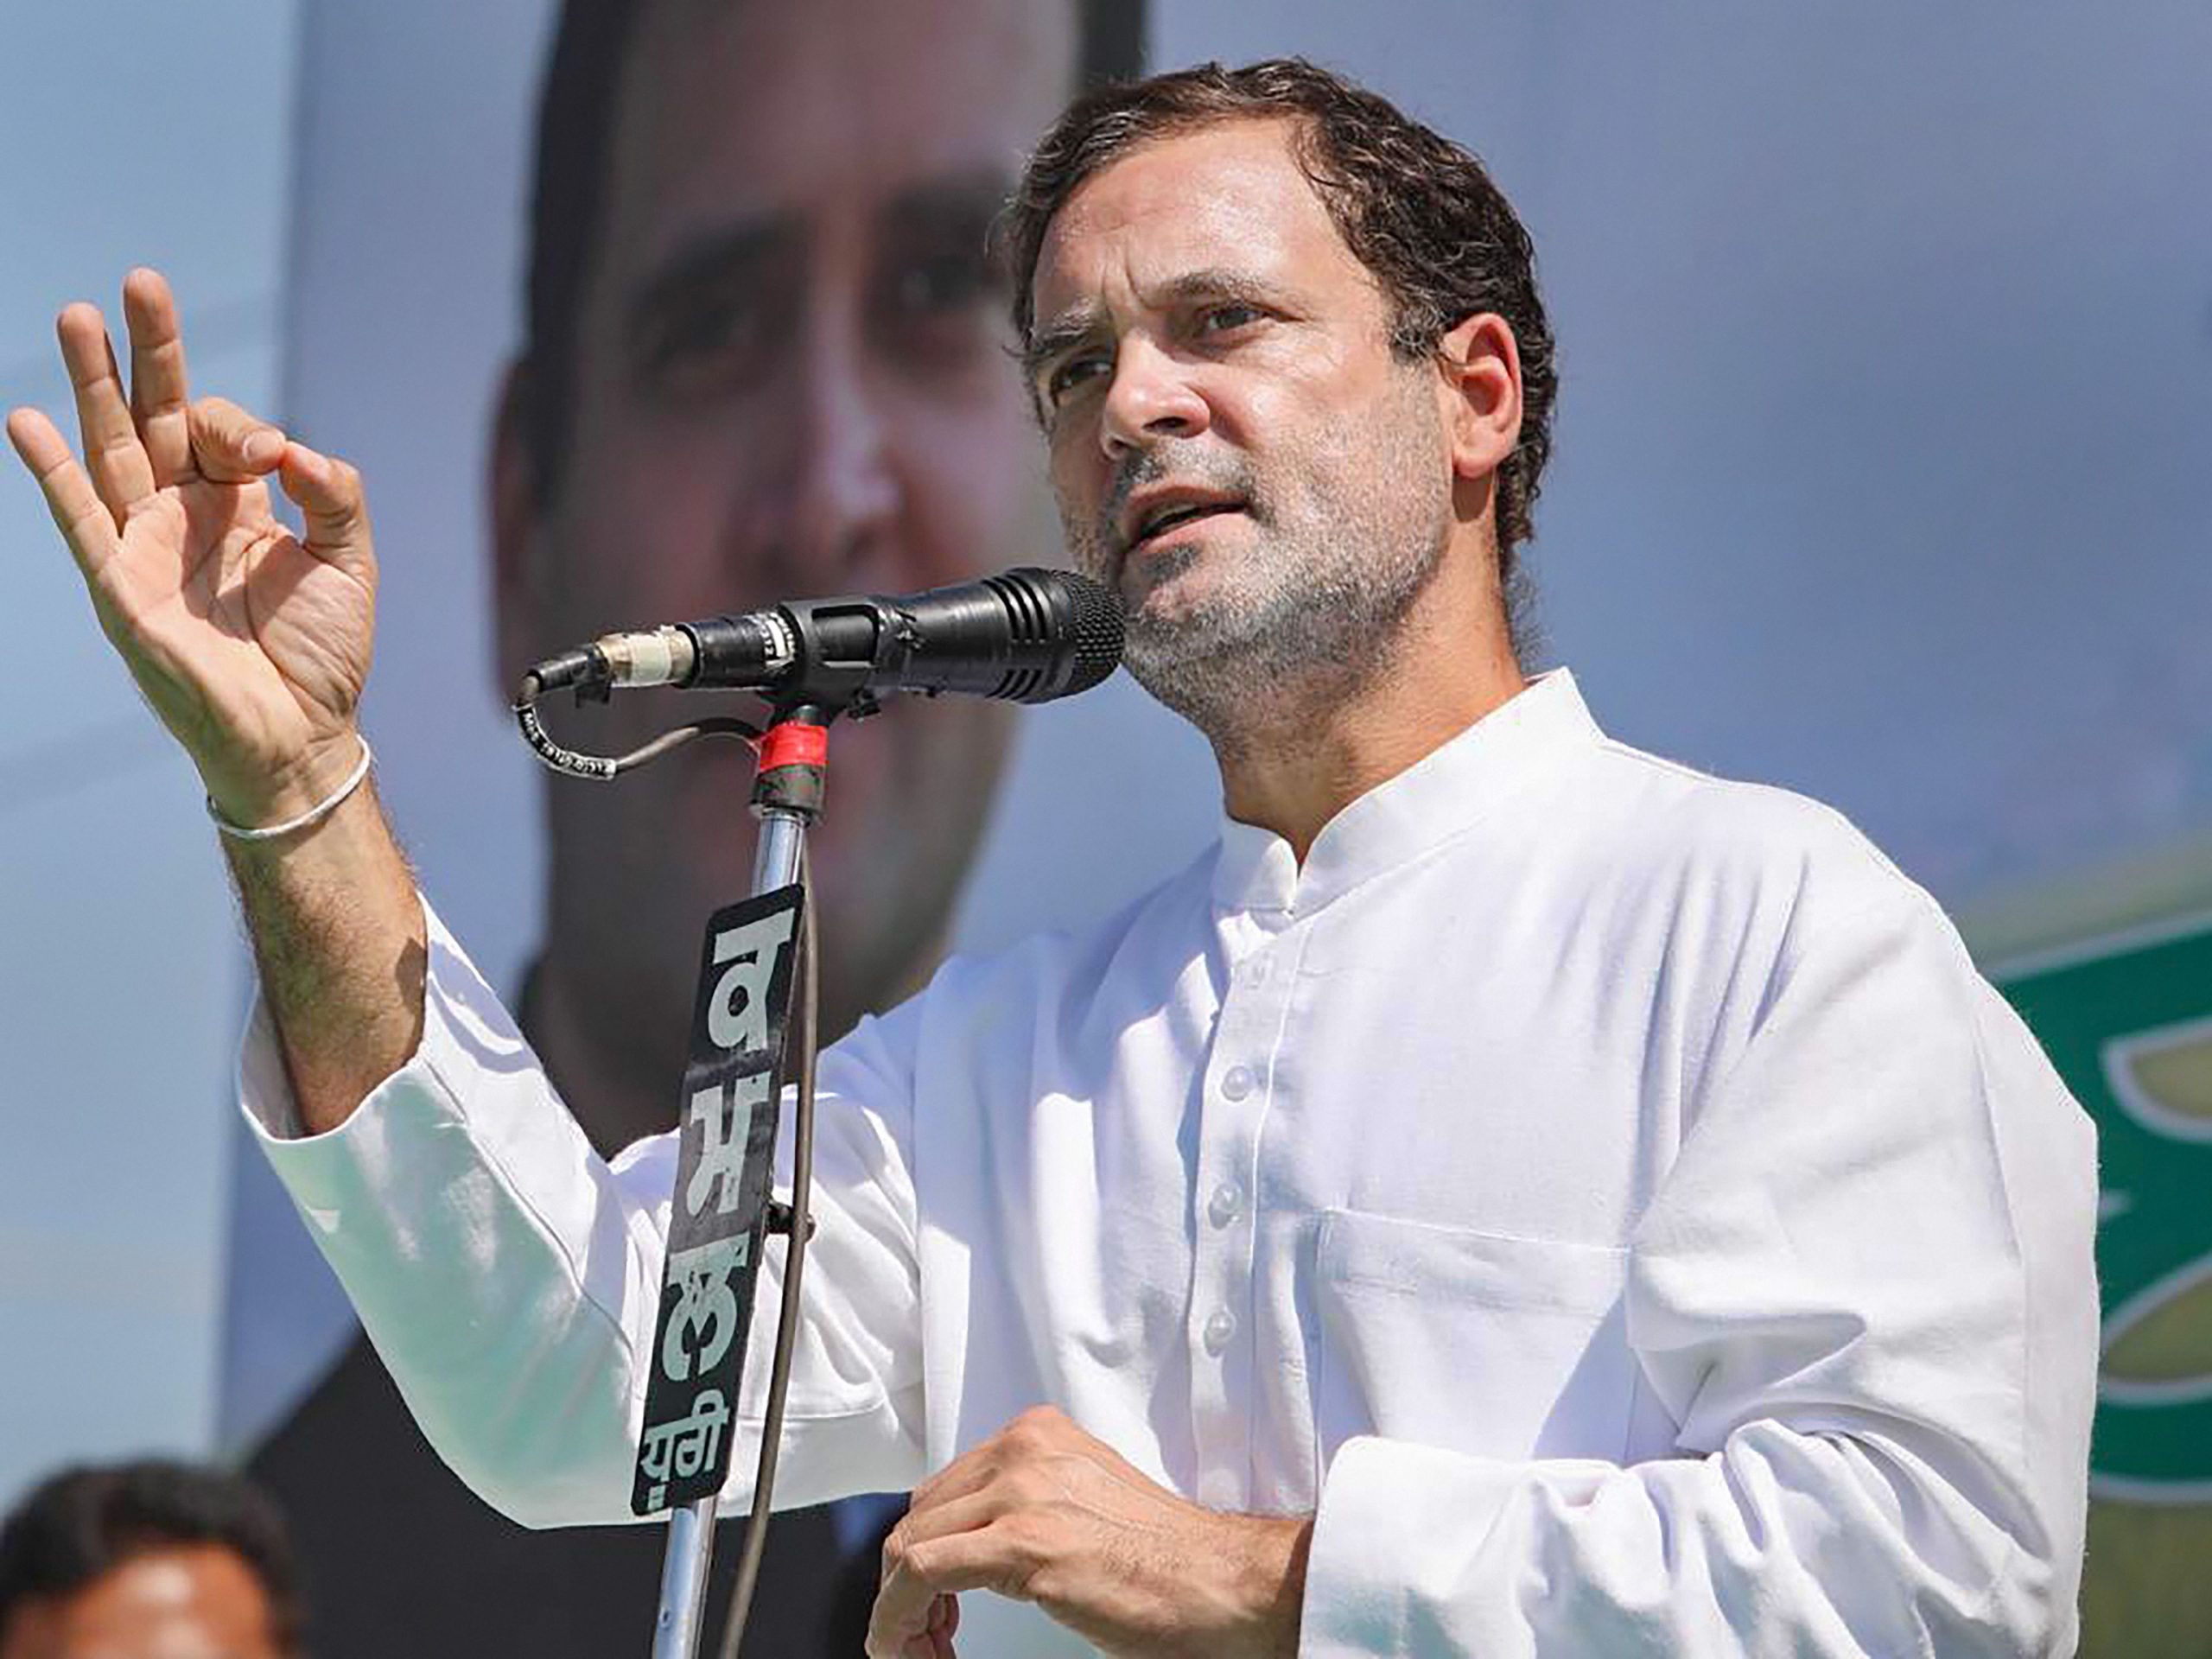 ‘Farm laws will take away India’s freedom’: Rahul Gandhi lashes out at Modi government